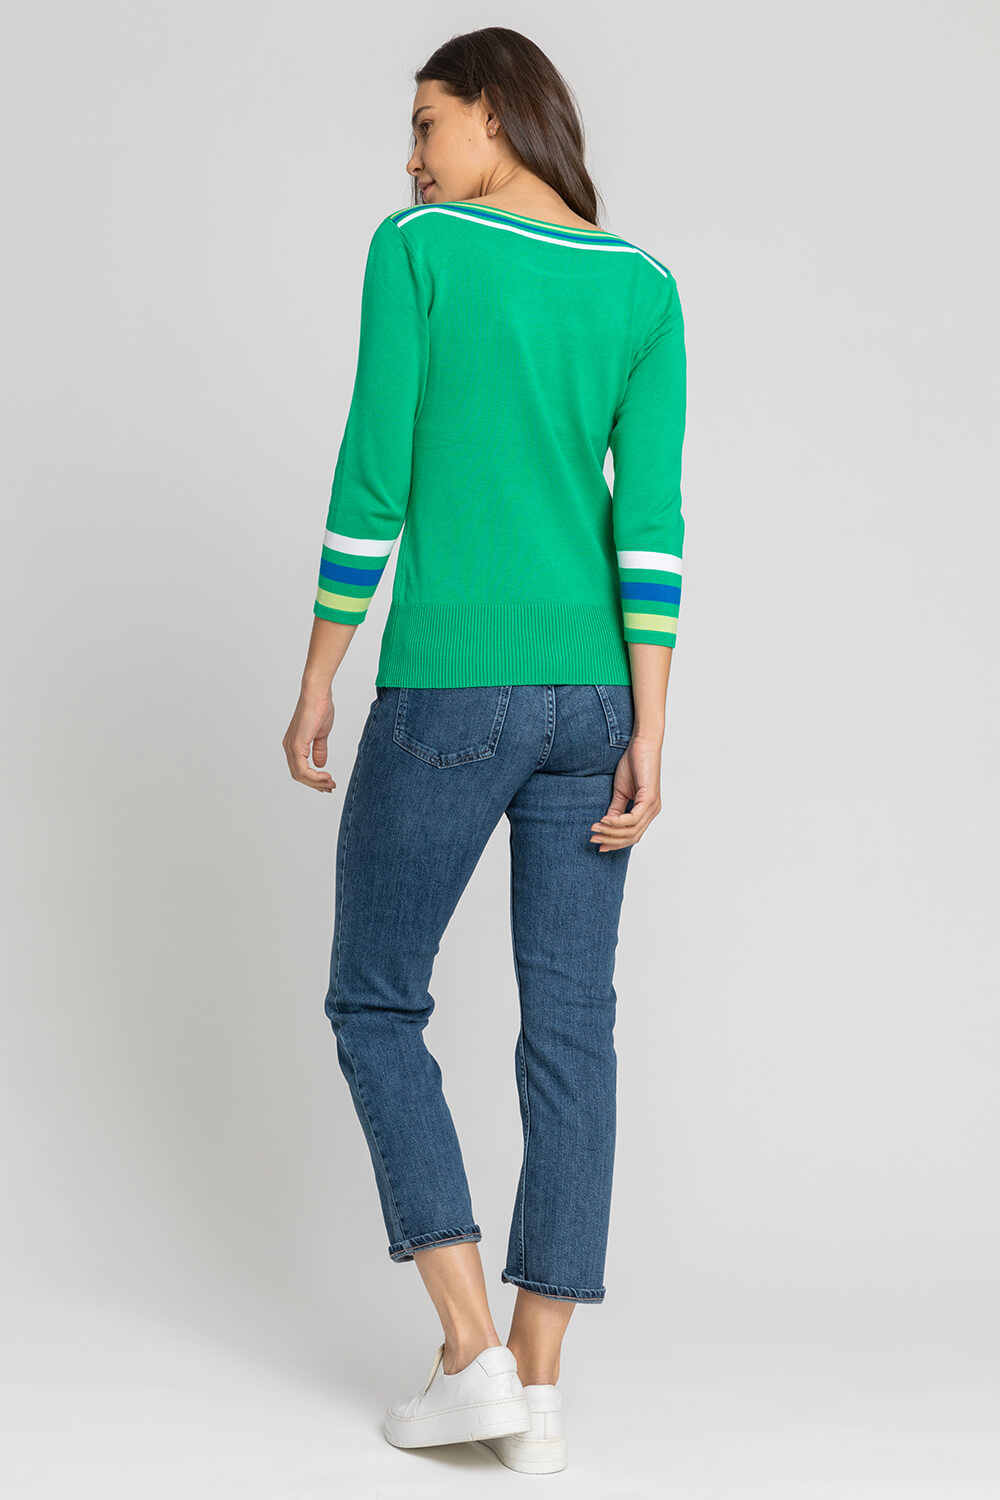 Emerald Heart Embroidered Stripe Print Jumper, Image 2 of 5